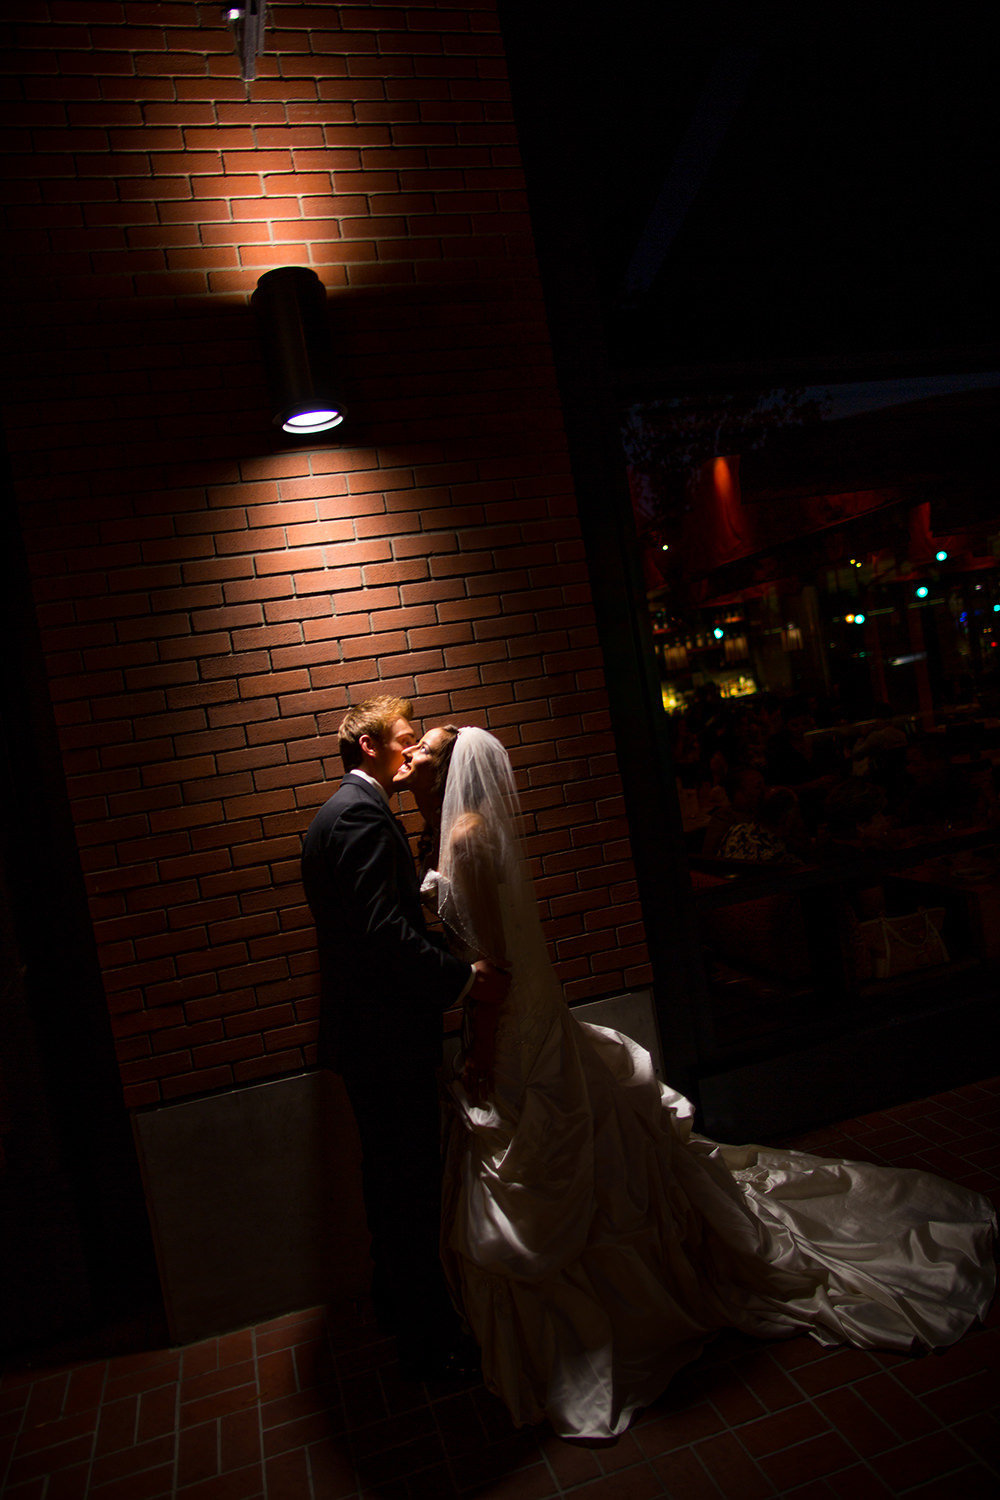 dramatic night shot with bride and groom